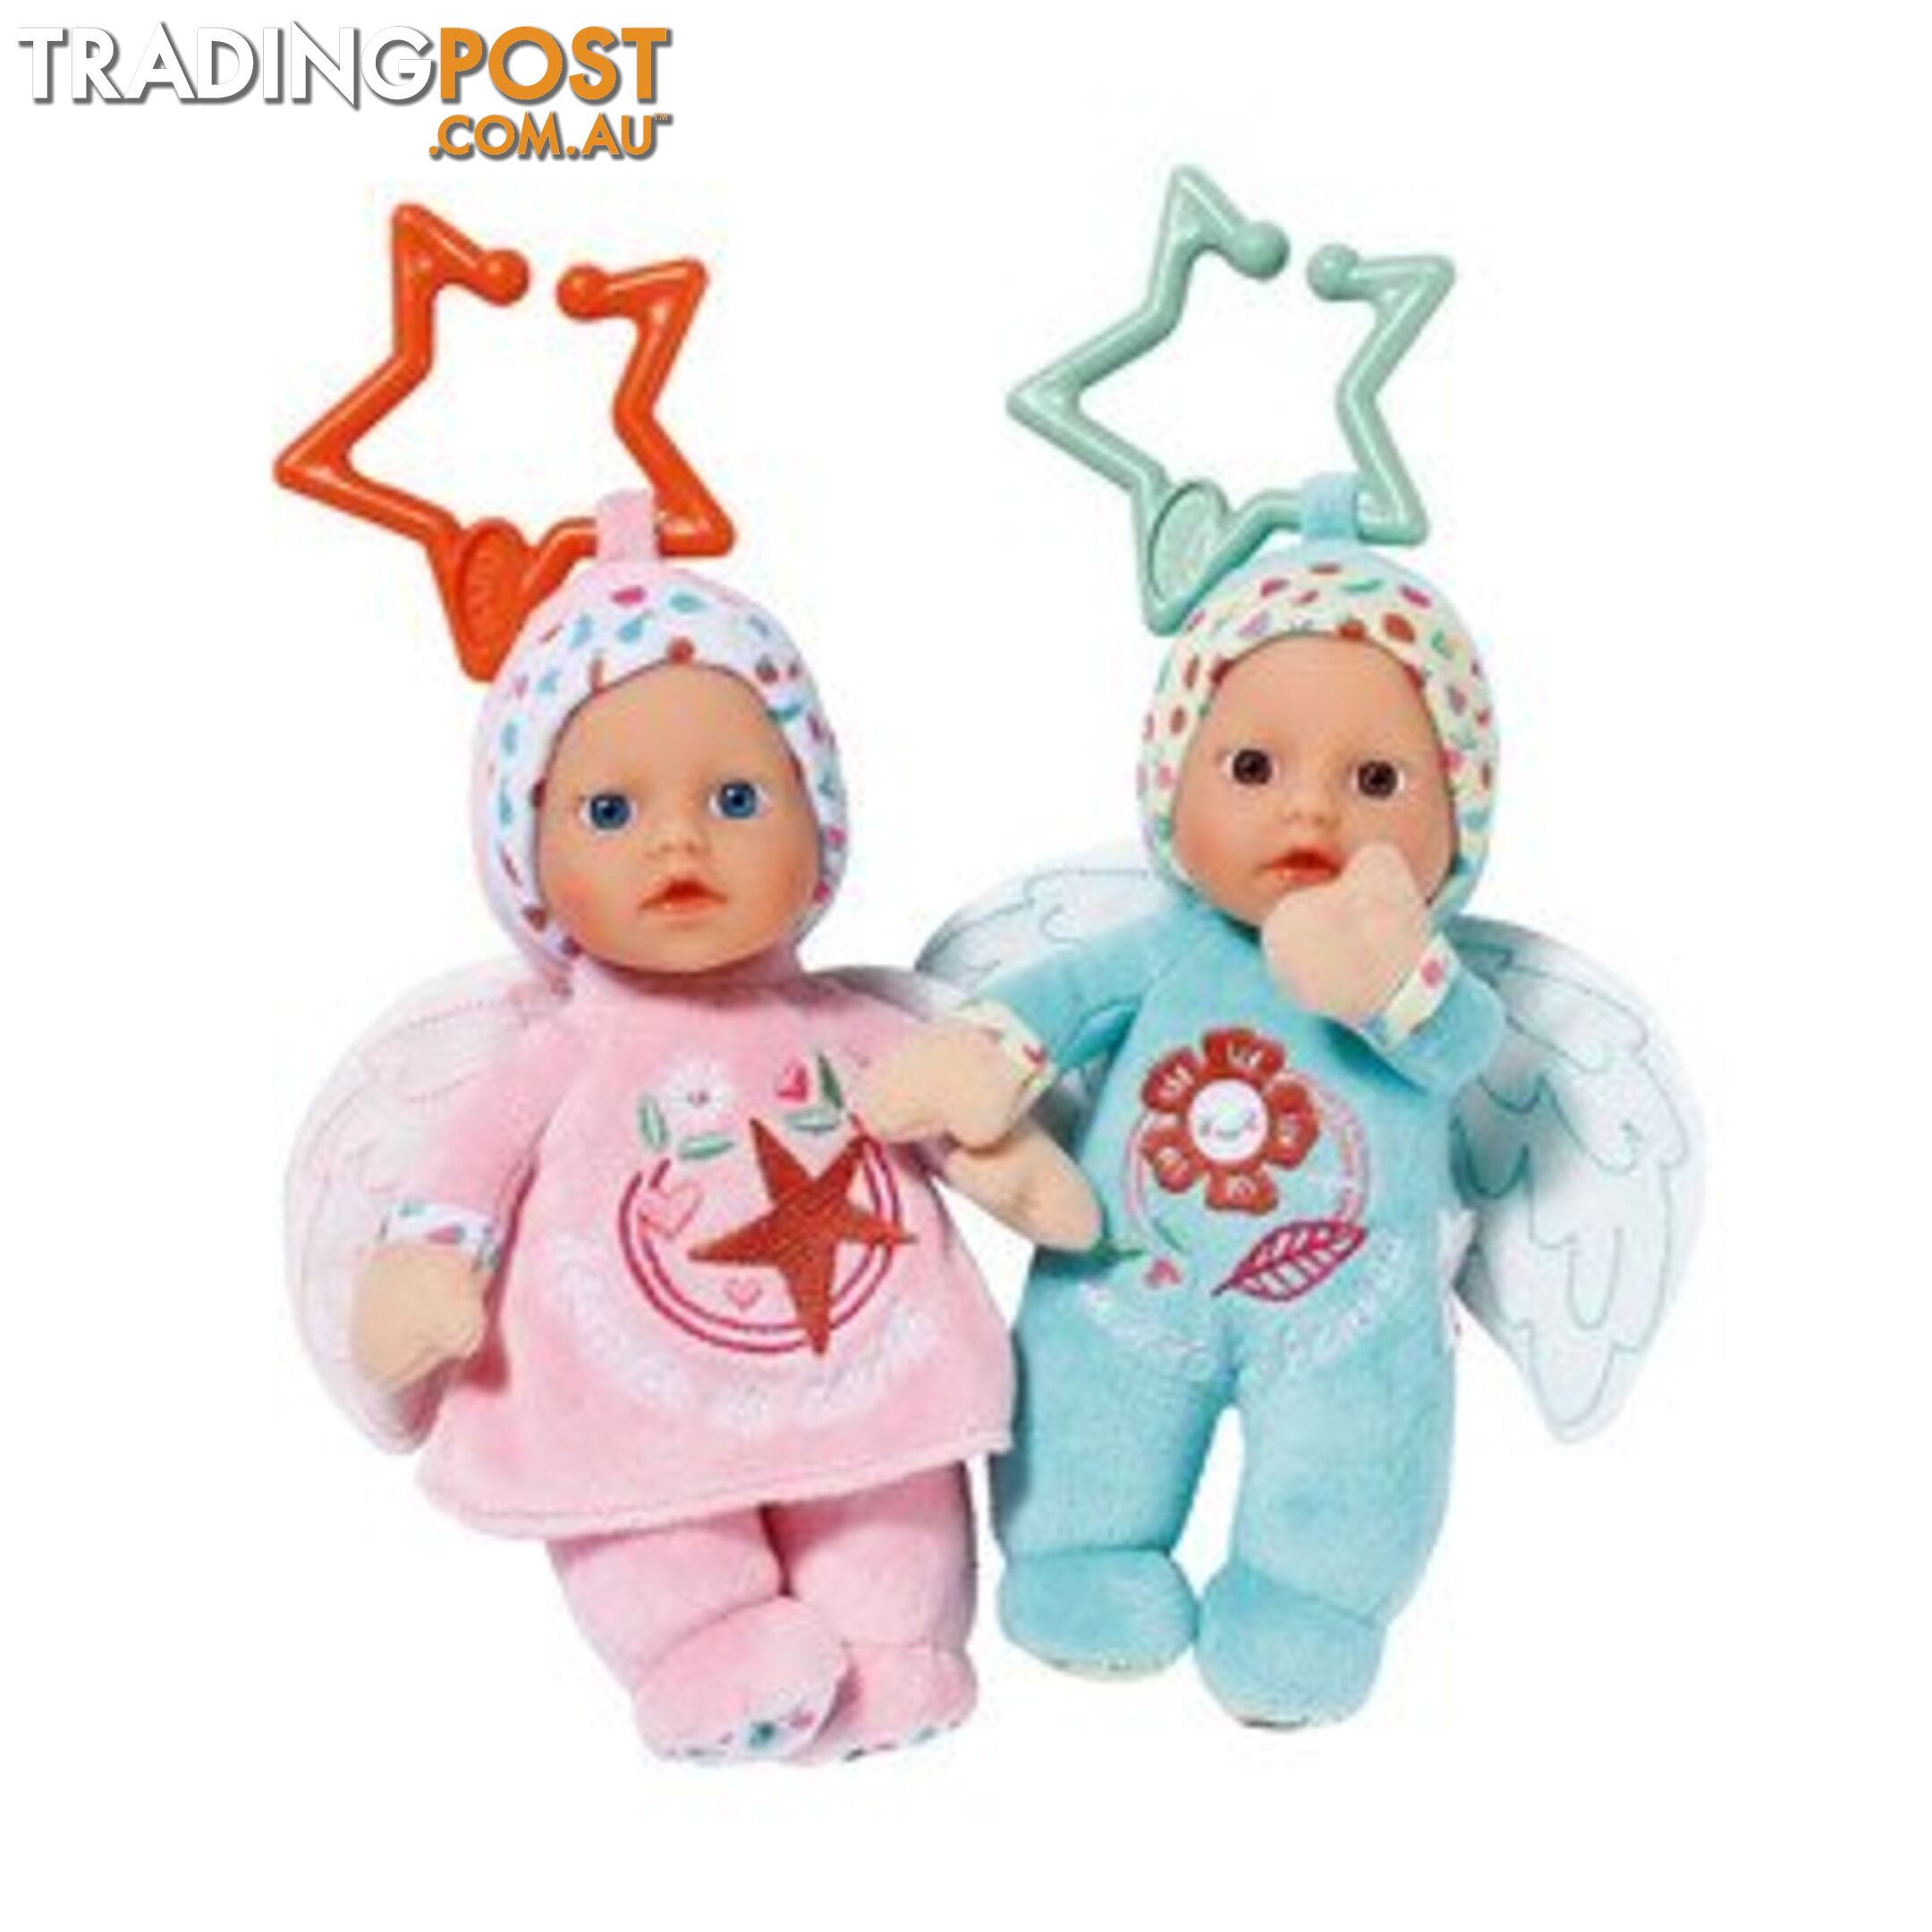 Baby Born - Cuddly Mermaid For Babies 30cm Bj832288 - 4001167832288